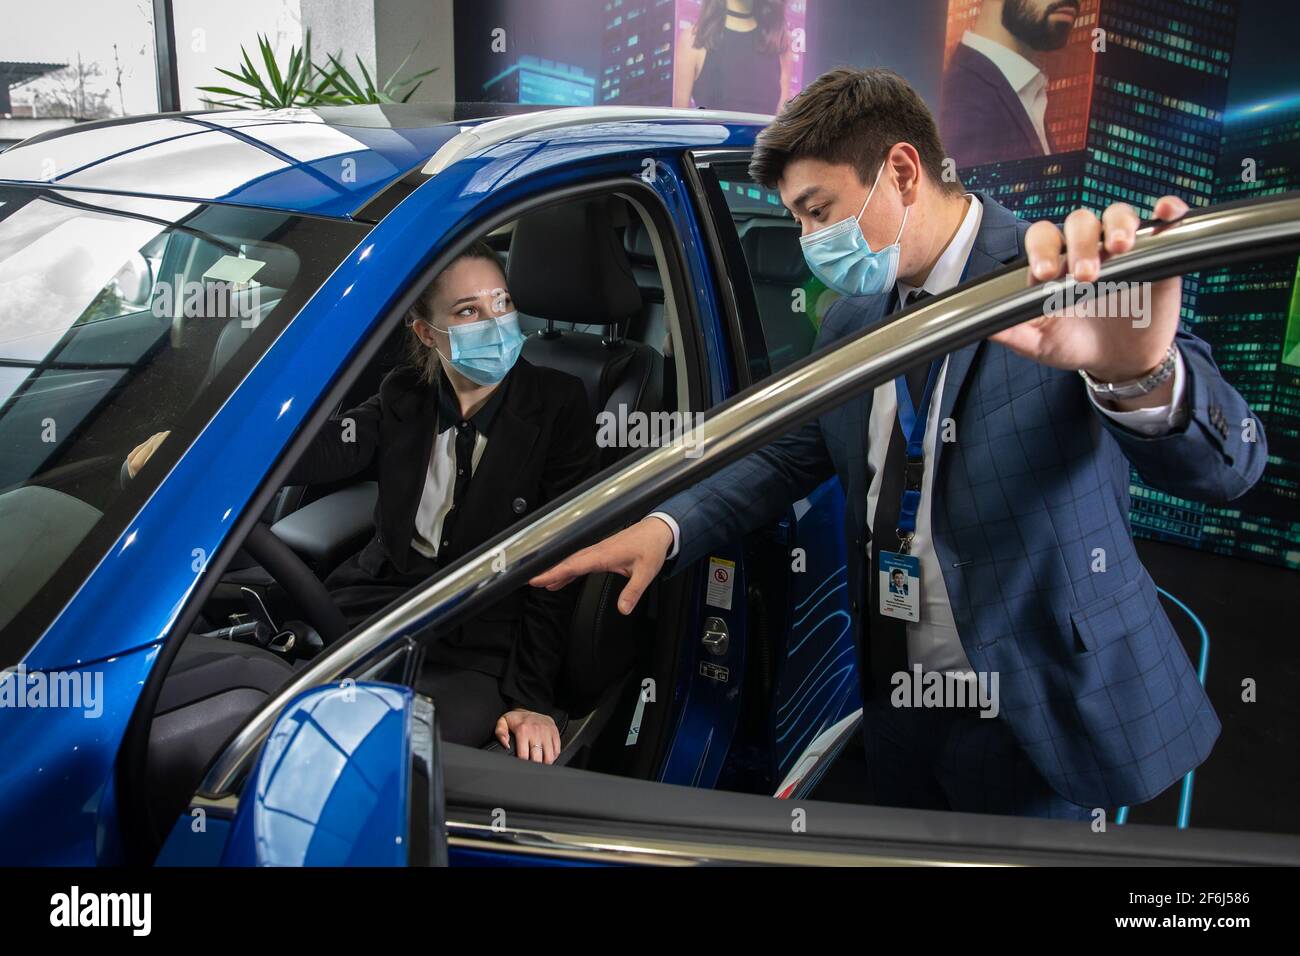 (210401) -- ALMATY, April 1, 2021 (Xinhua) -- A salesman introduces a HAVAL car to a customer at a dealer shop in Almaty, Kazakhstan, April 1, 2021. Great Wall Motor Co., Ltd.'s HAVAL brand entered the Kazakhstan market on thursday, three main models of crossover vehicles F7, F7x and off-road vehicle H9 officially began the sales to Kazakhstan residents in Almaty. (Astana Motors/Handout via Xinhua) Stock Photo